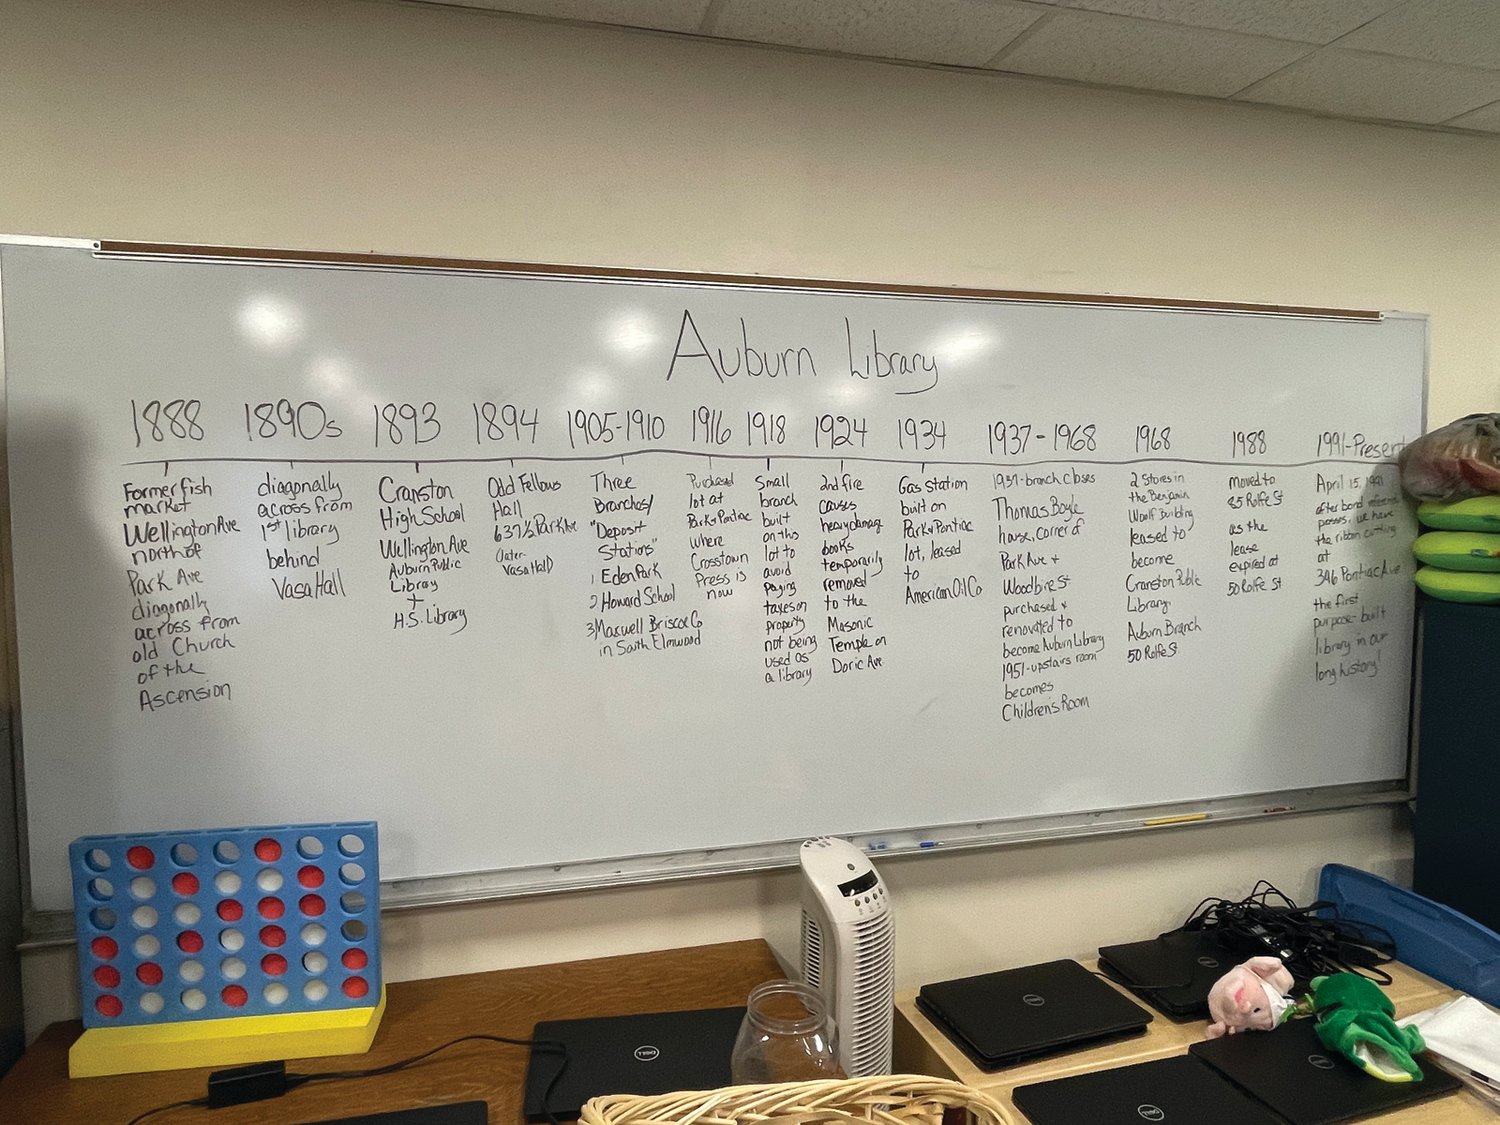 DECADES OF HISTORY: Auburn Branch Librarian Karen McGrath performed roughly eight hours of research to prepare this whiteboard timeline of the branch’s history as part of the Cranston Public Library’s 50th anniversary celebration in 2018. 